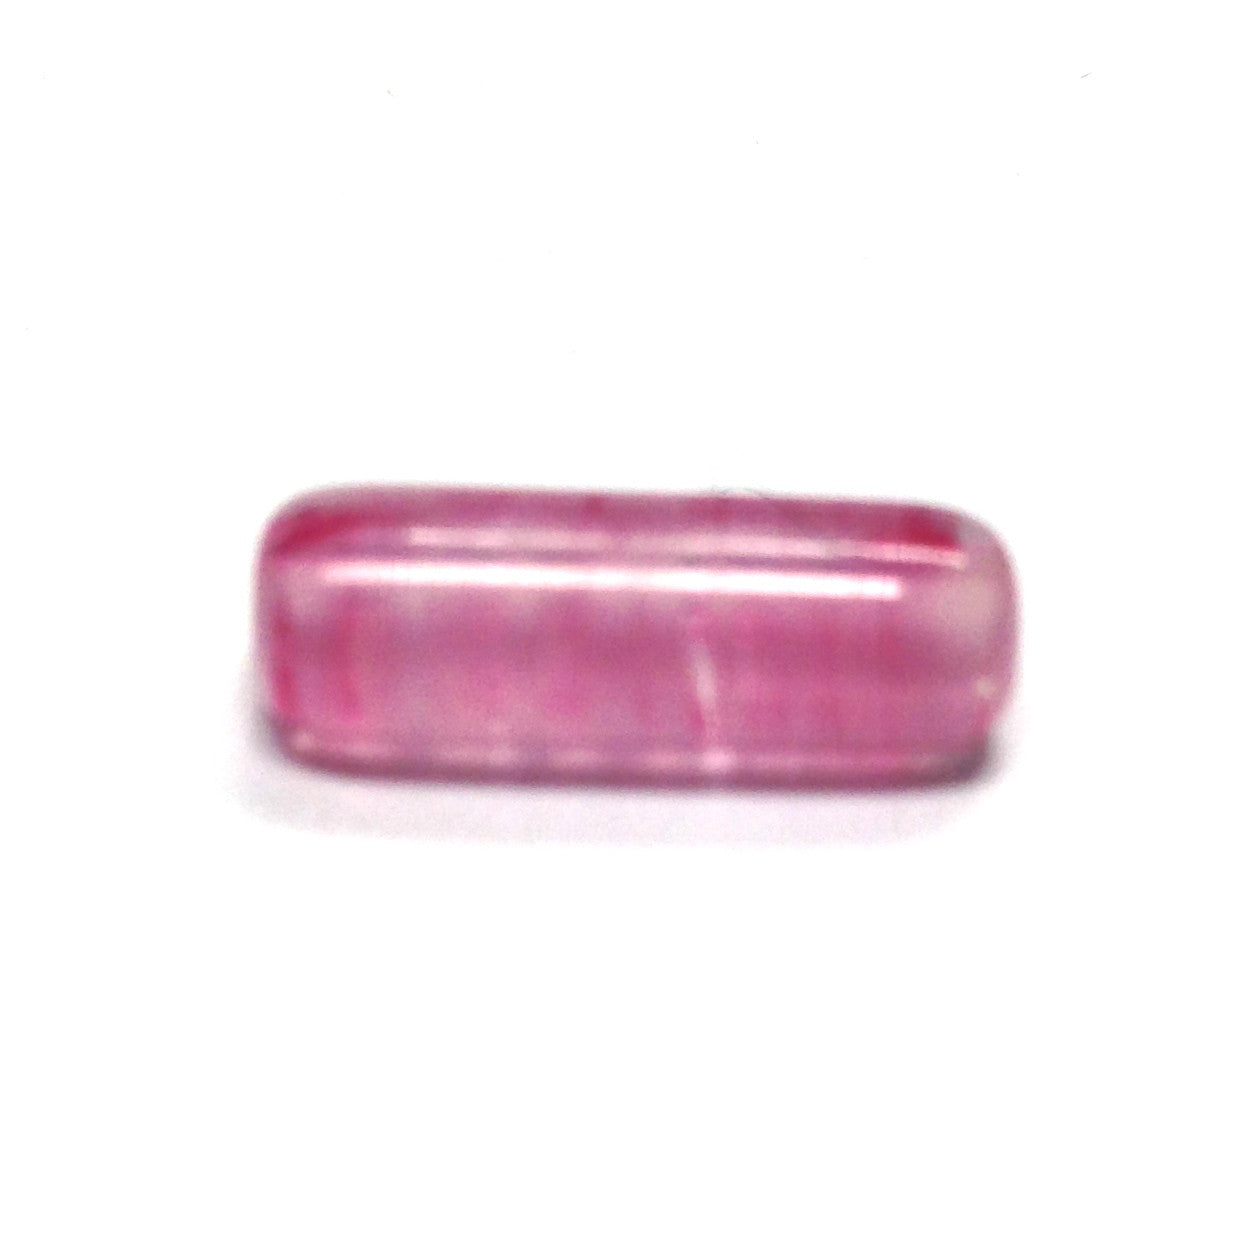 14X5MM Pink Glass Tube Bead (36 pieces)